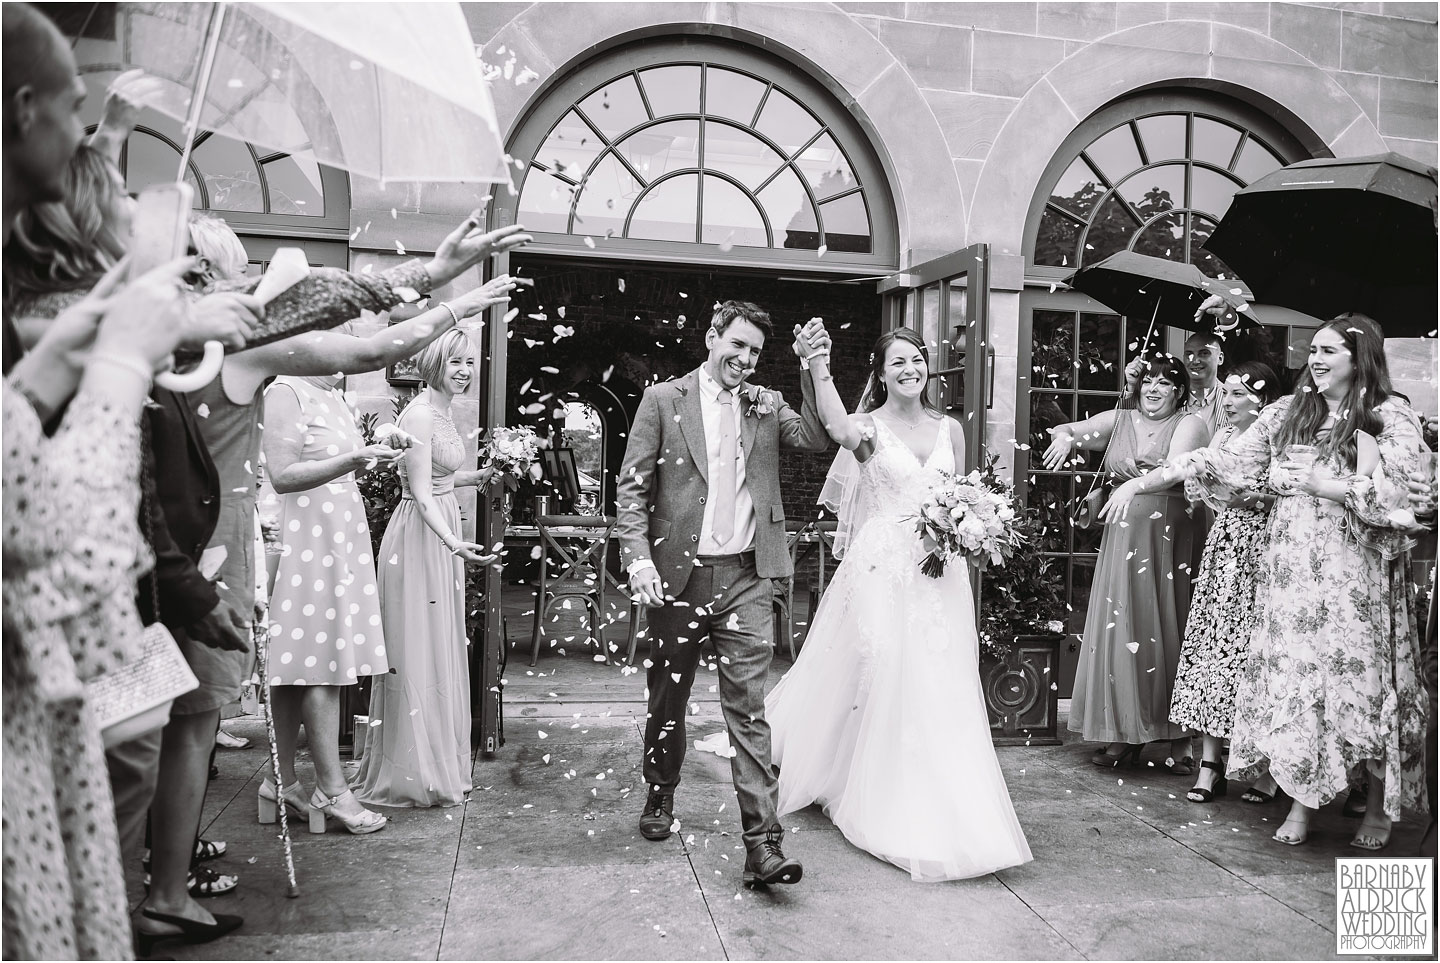 Confetti at the Fig House Walled Garden at Middleton Lodge, Fig House Walled Garden Middleton Lodge Wedding Photos, Fig House Middleton Lodge Richmond, Middleton Lodge wedding photographer, Middleton Lodge Wedding Photography, Yorkshire Wedding Photographer Barnaby Aldrick